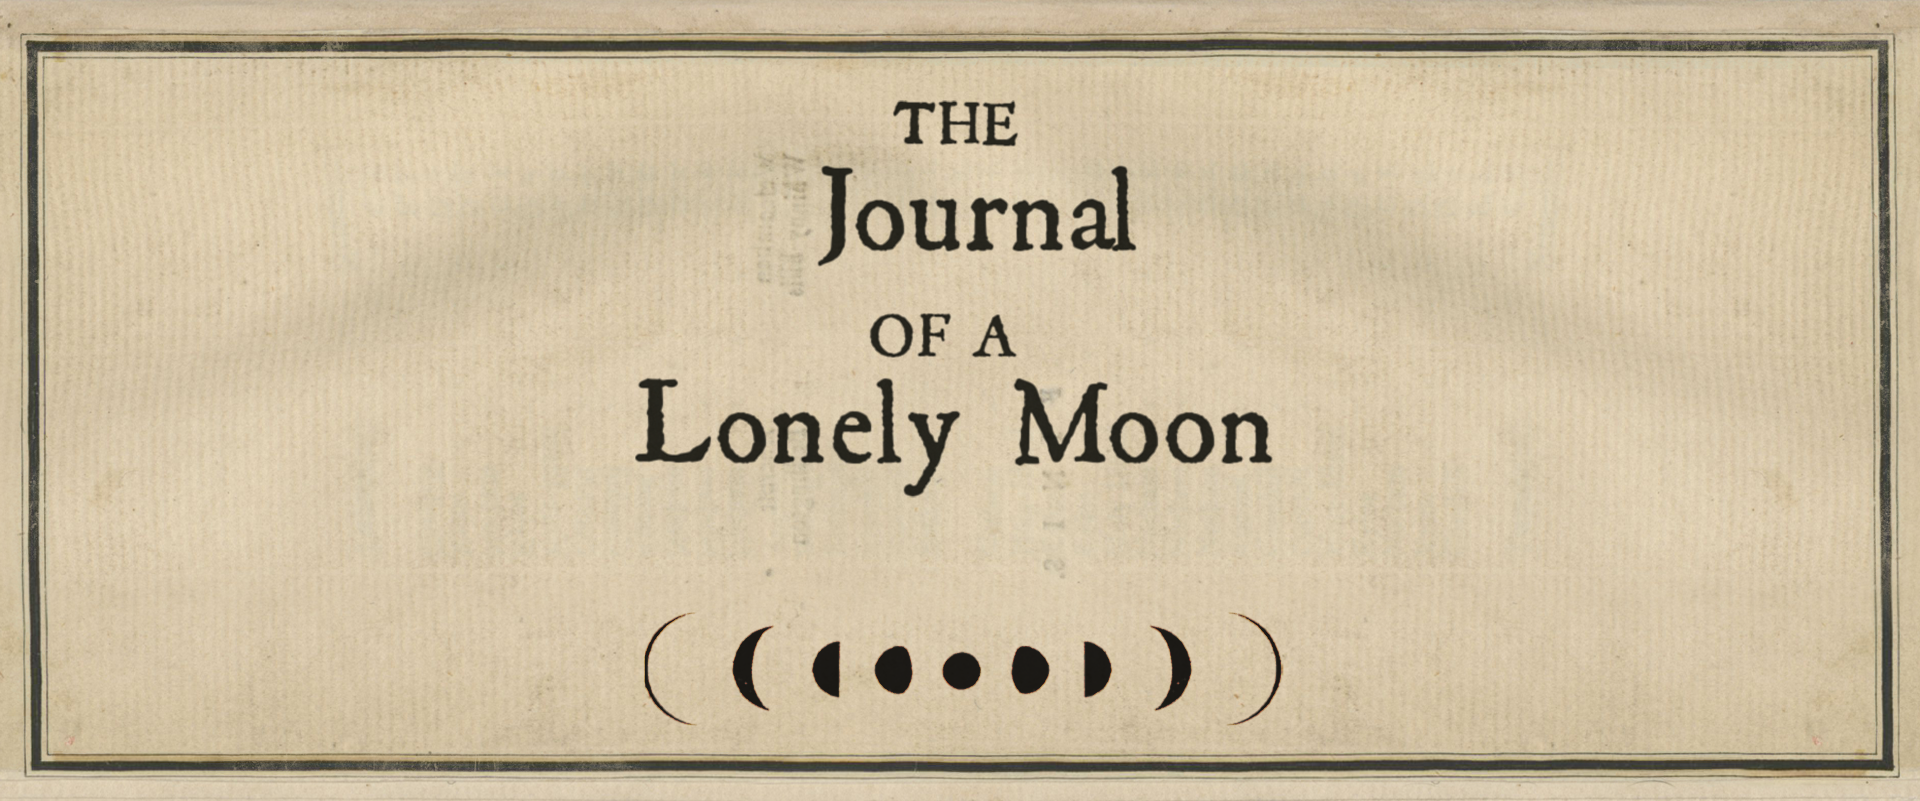 The Journal of  a Lonely Moon